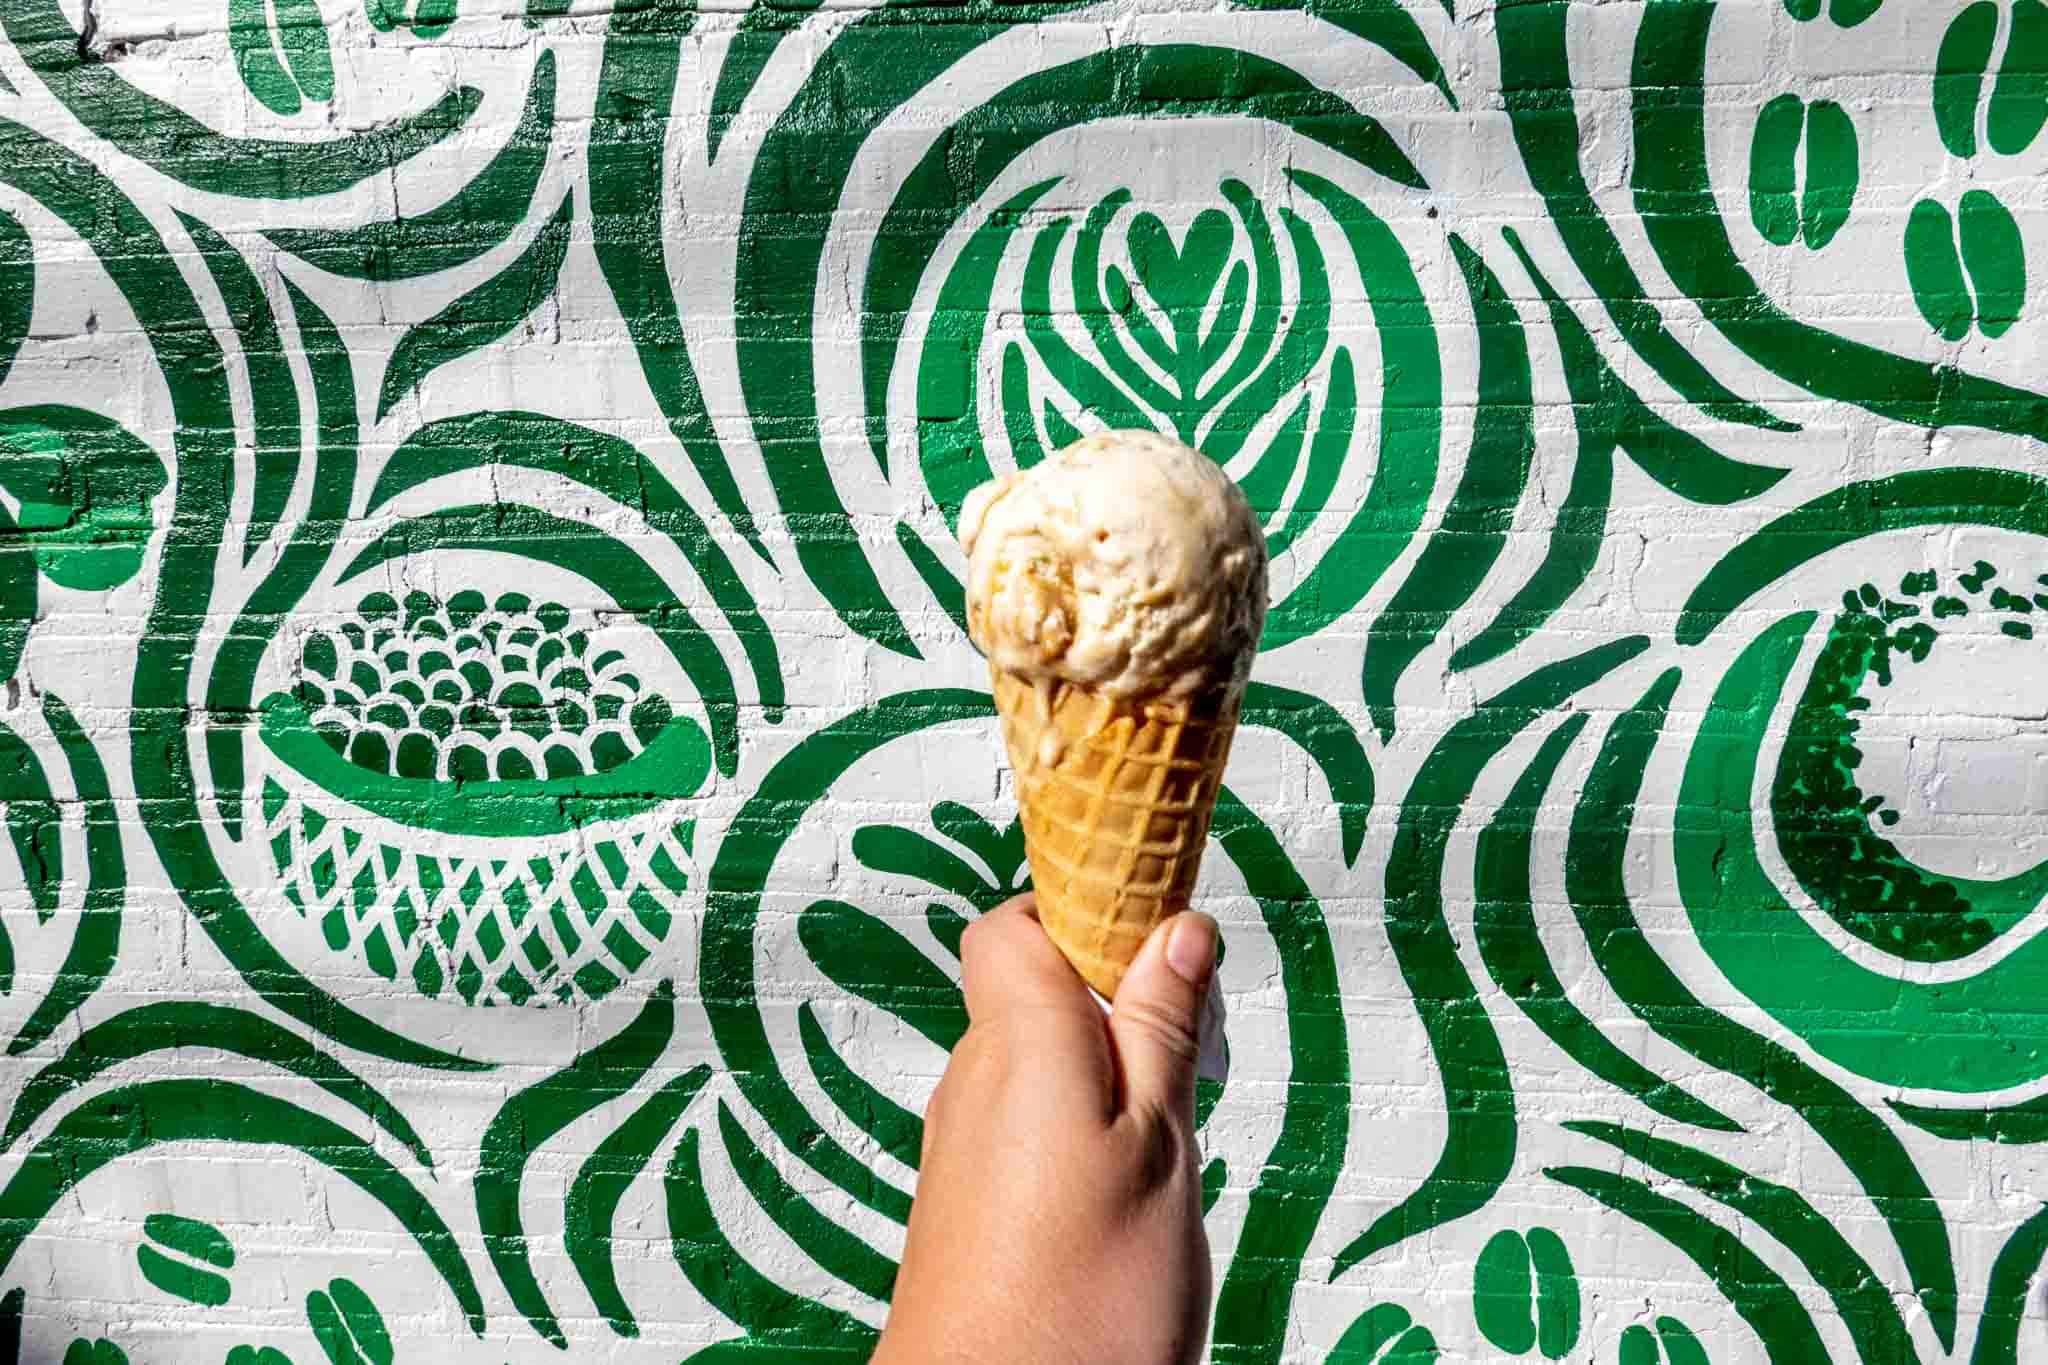 Ice cream cone in front of a green wall